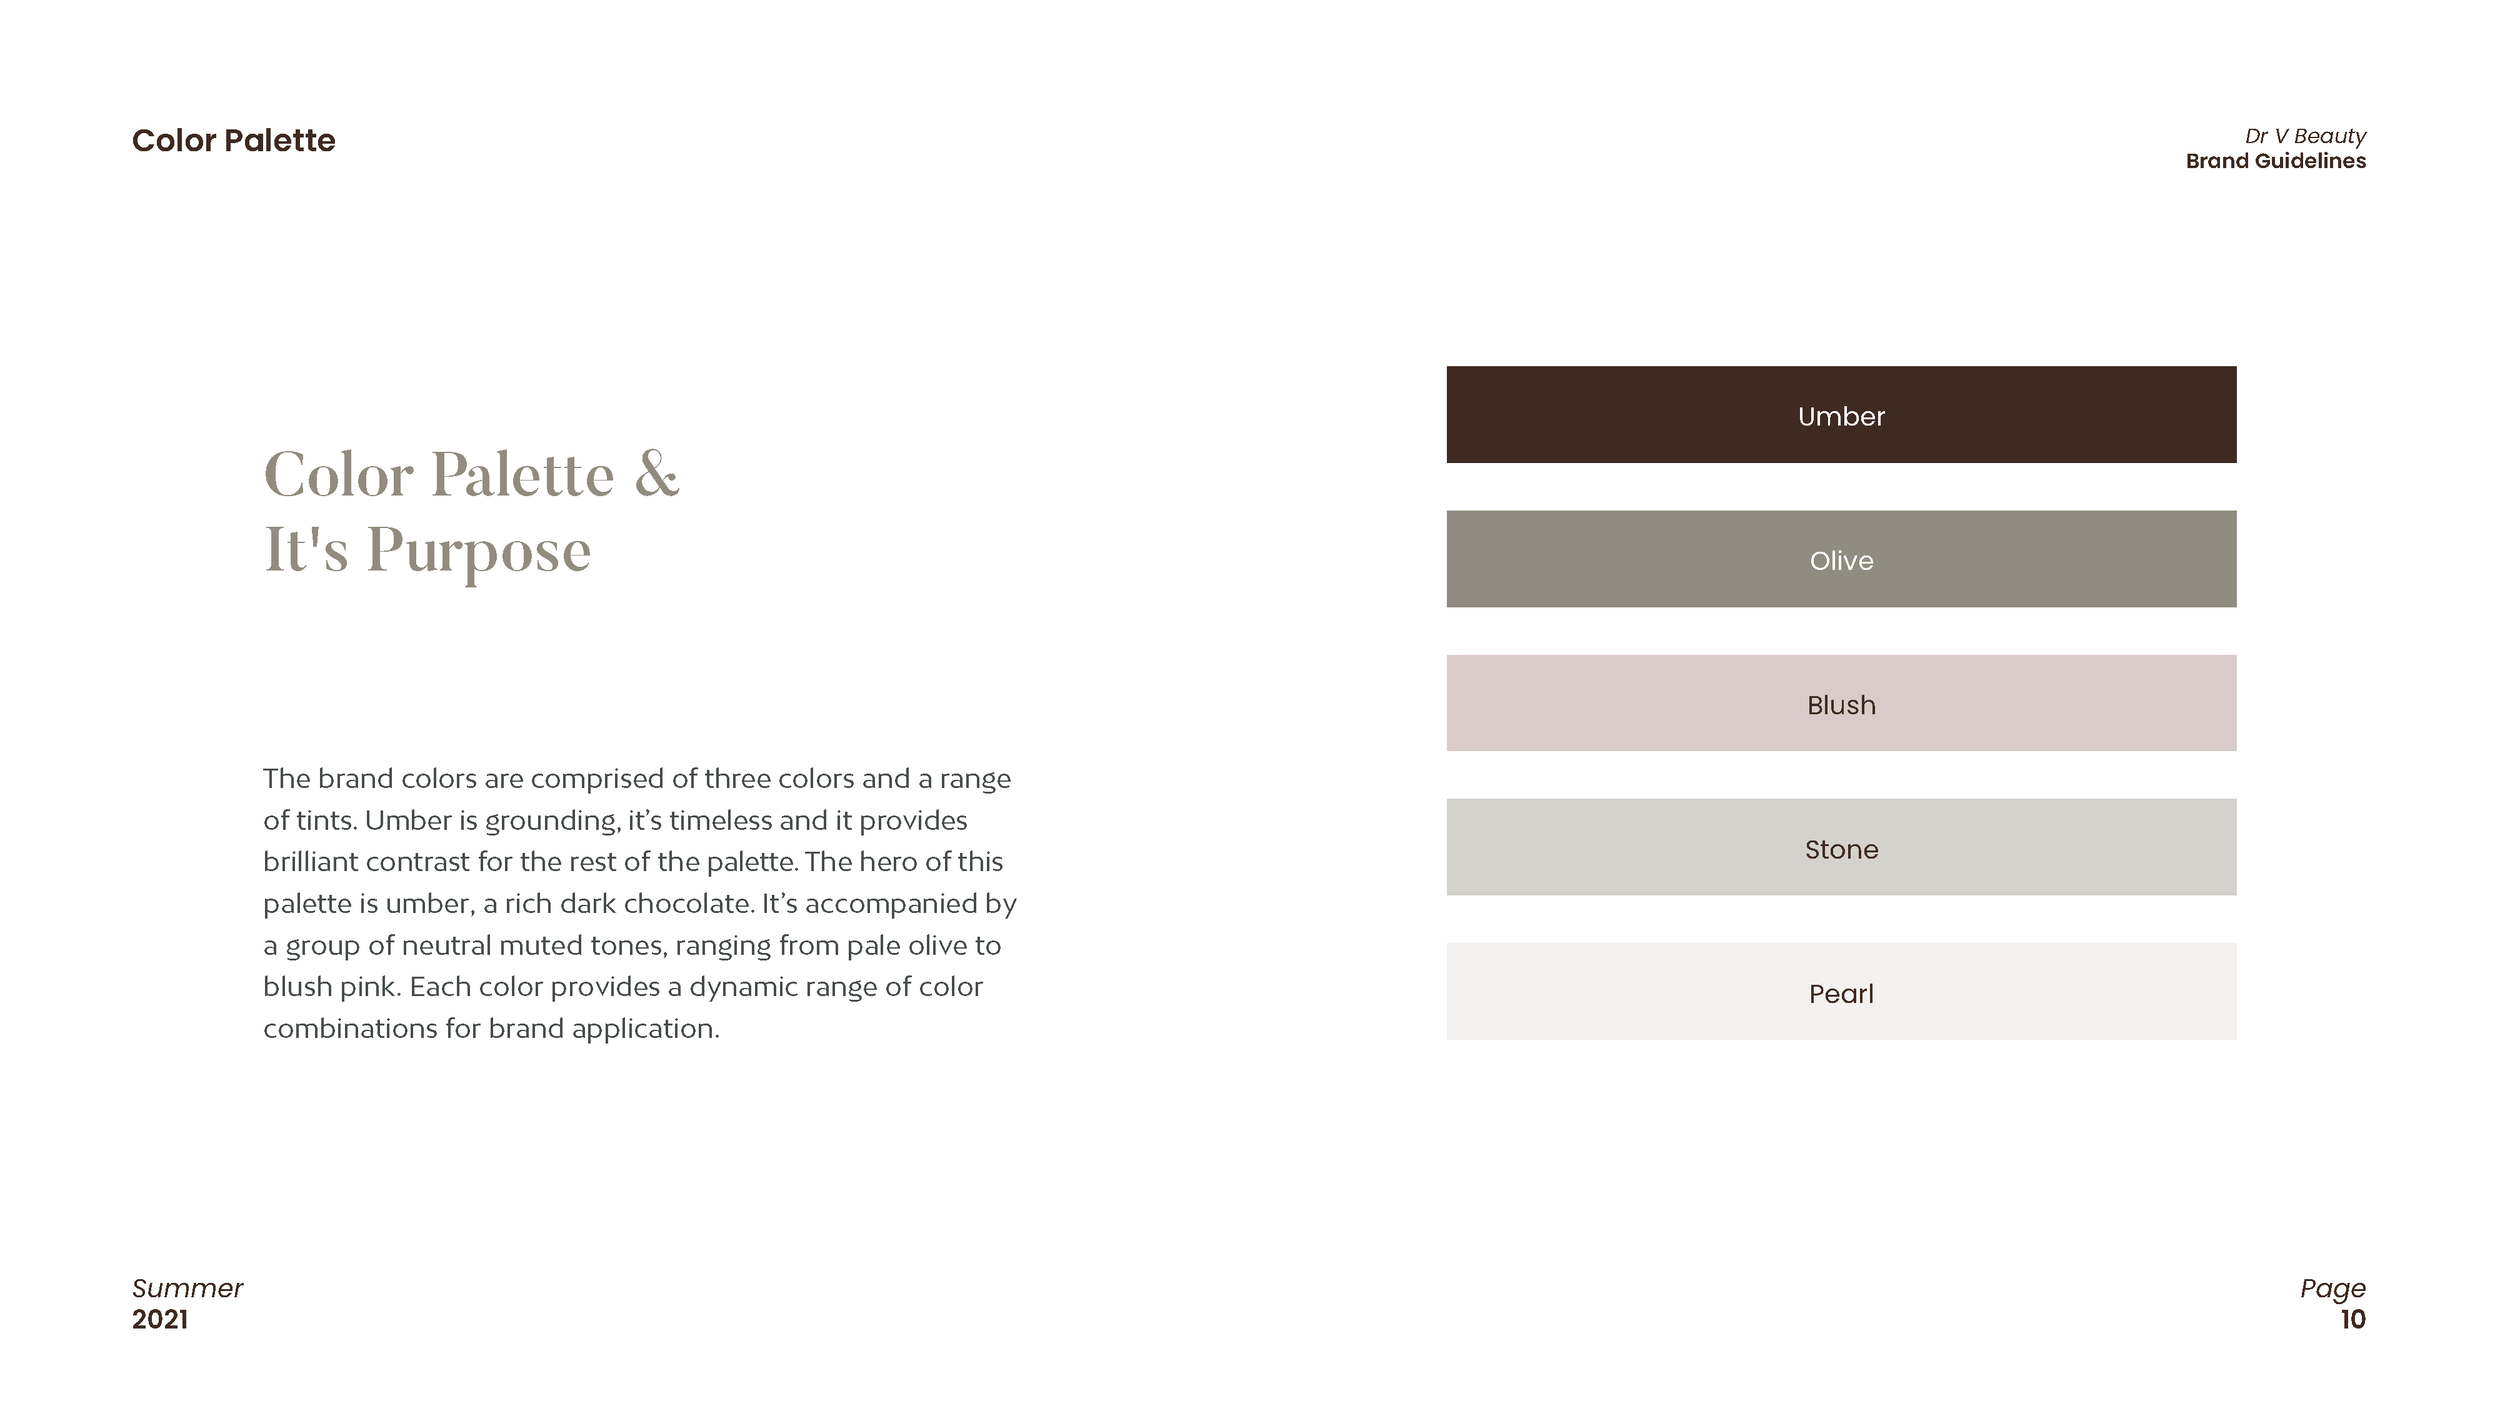 Dr V Beauty - Brand Guidelines_Page_10.png